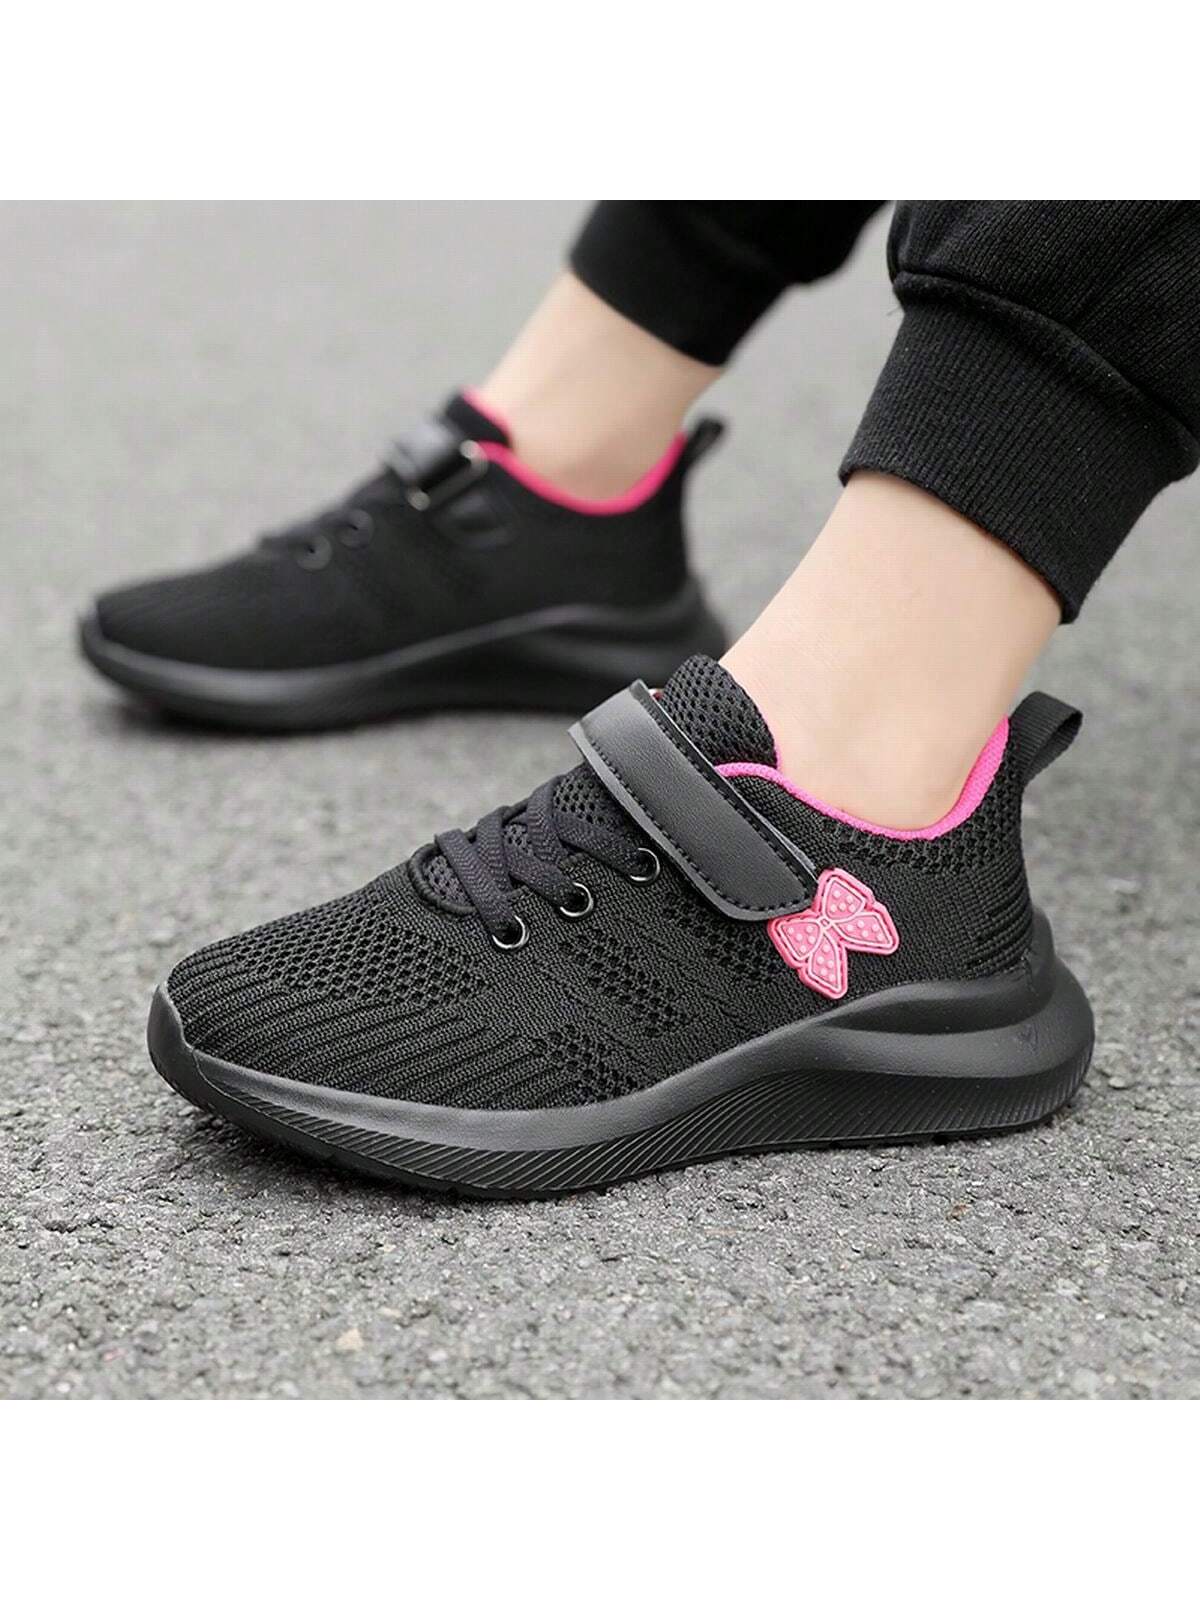 1 Pair Lightweight & Comfortable Women'S Athletic Shoes, Casual Breathable Mesh Running Shoes, All-Match Summer Sneakers-Black-6